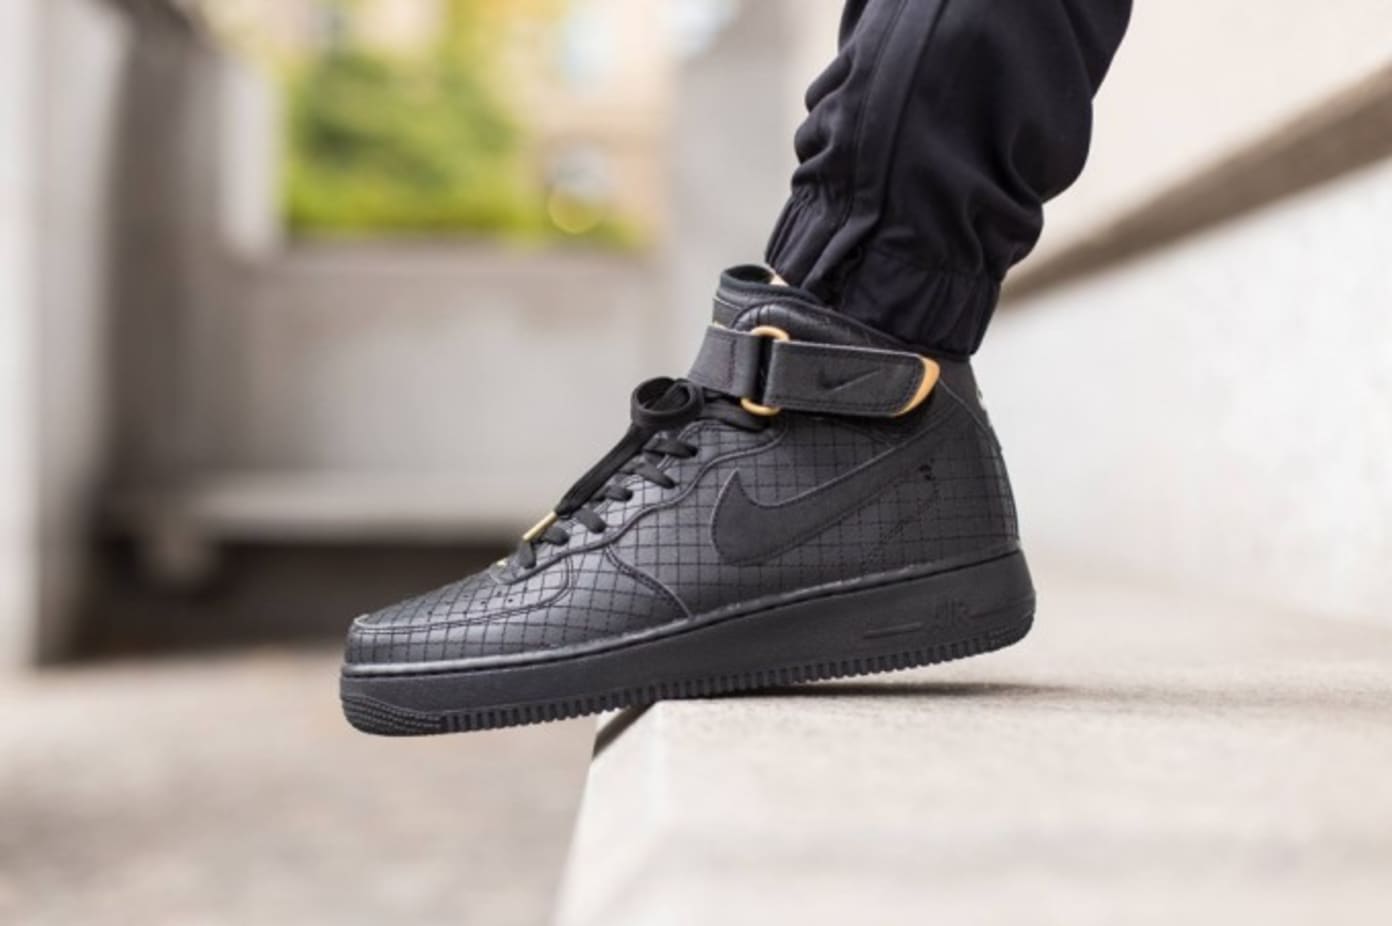 Nike Air Force 1 Mid 07 LV8 “Quilted” pack